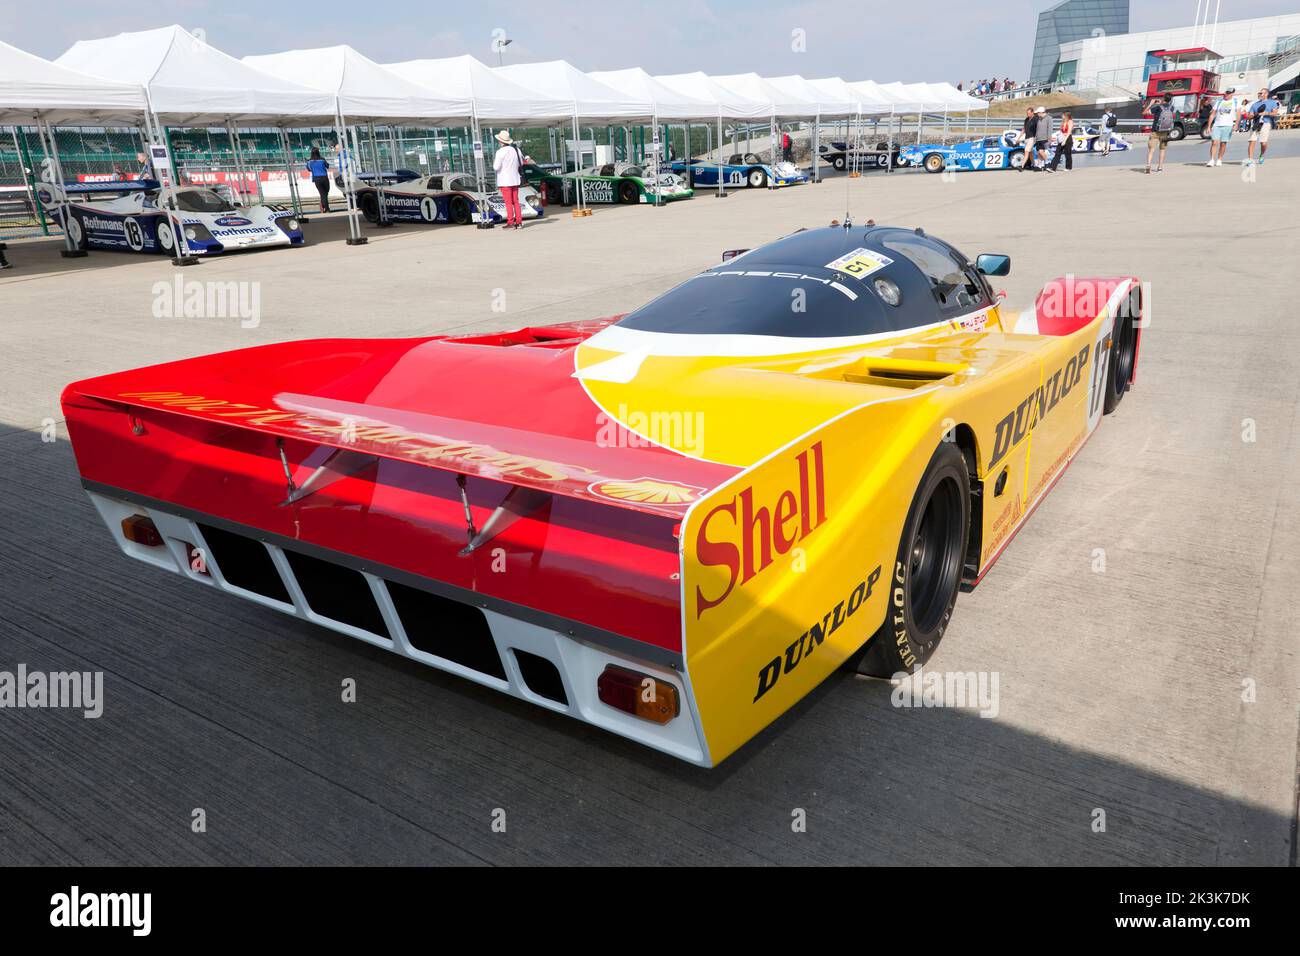 Three-quarters rear view of a 1988, Porsche 962, in the livery of Shell Dunlop, on display at the 2022 Silverstone Classic Stock Photo